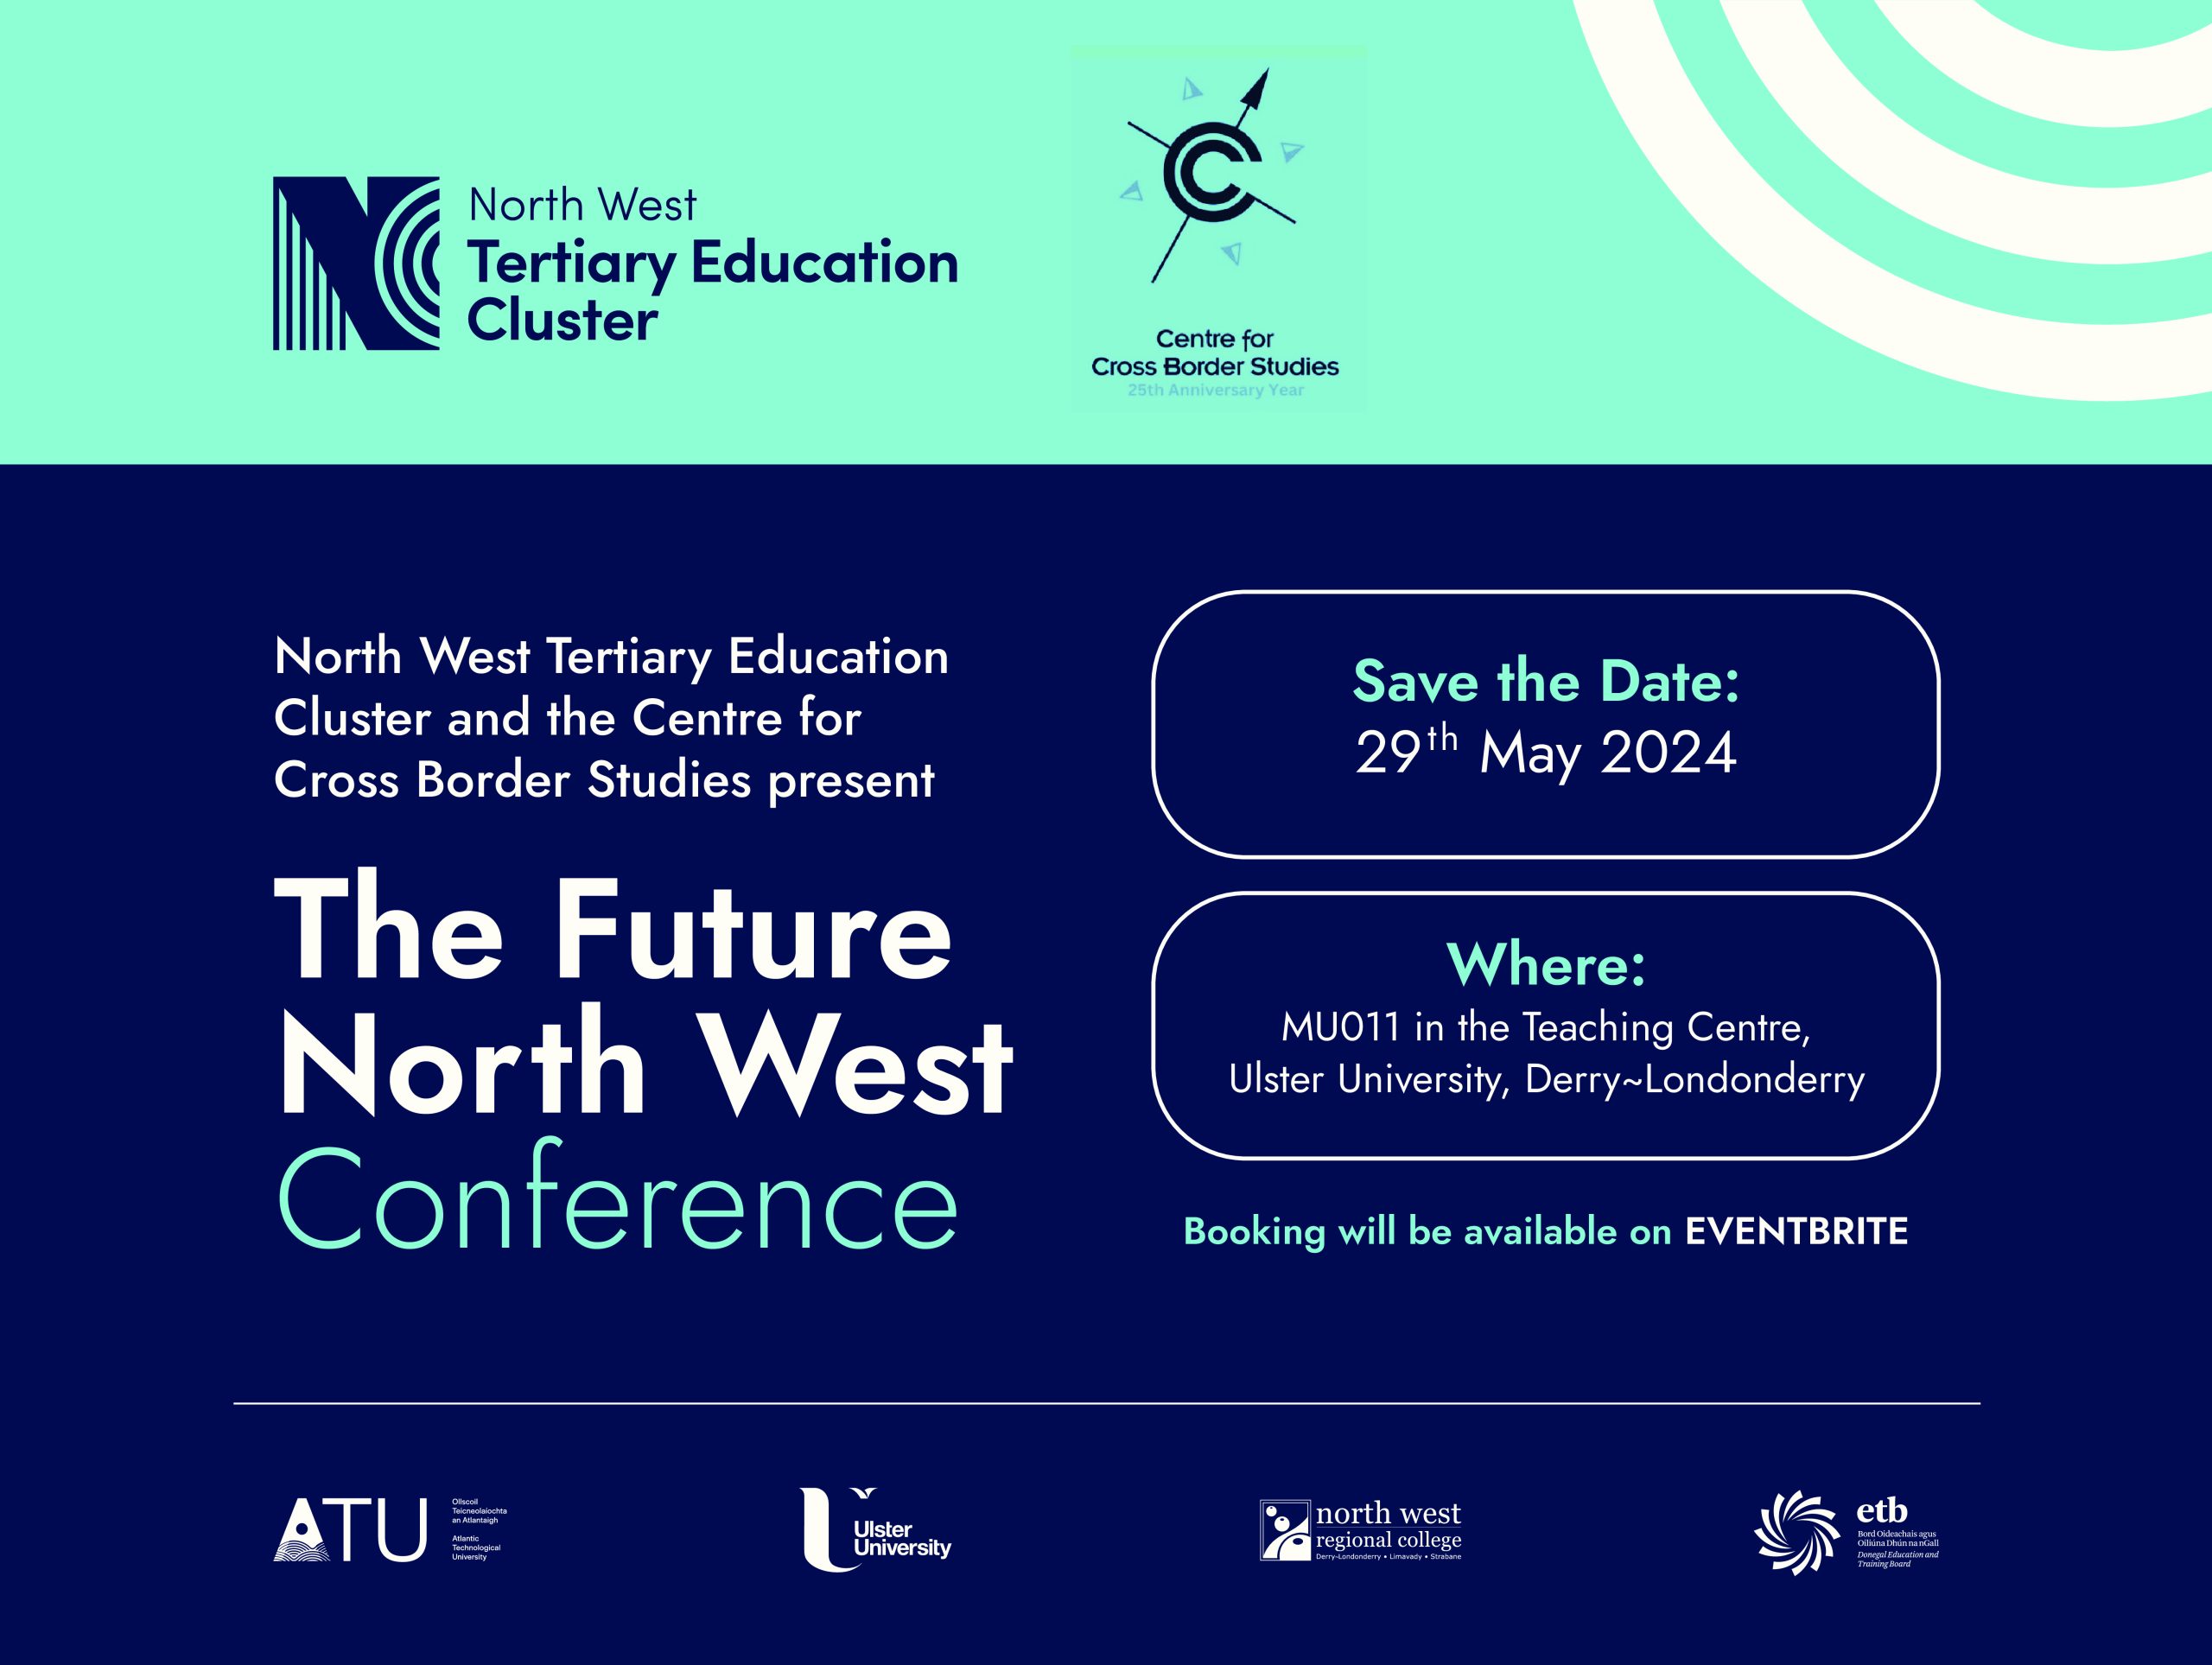 The Future North West Conference